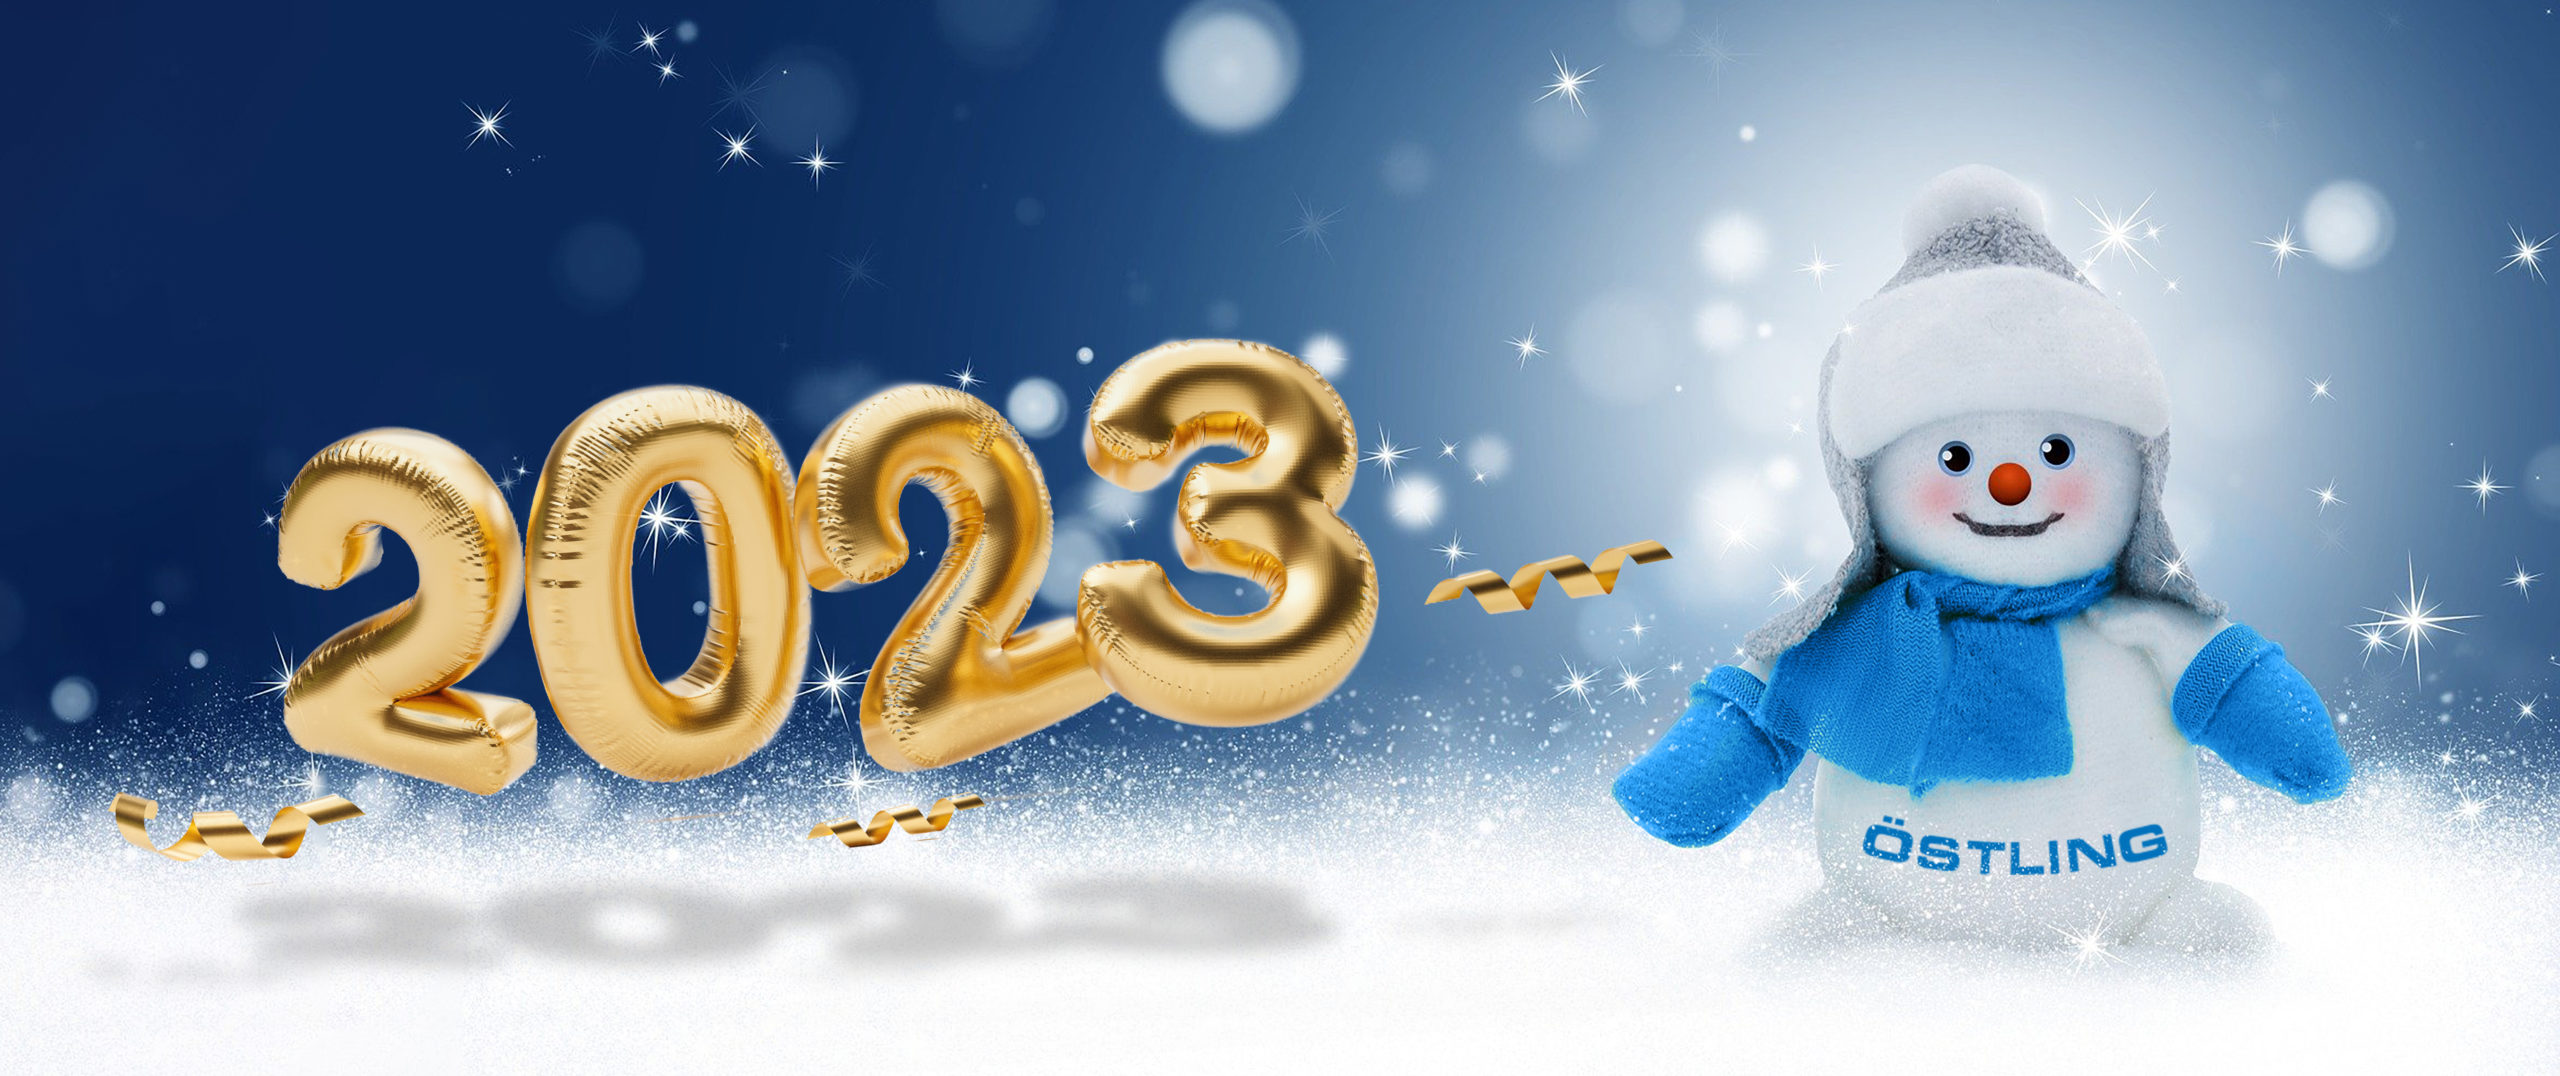 Happy New Year: Best wishes for a fruitful 2023!